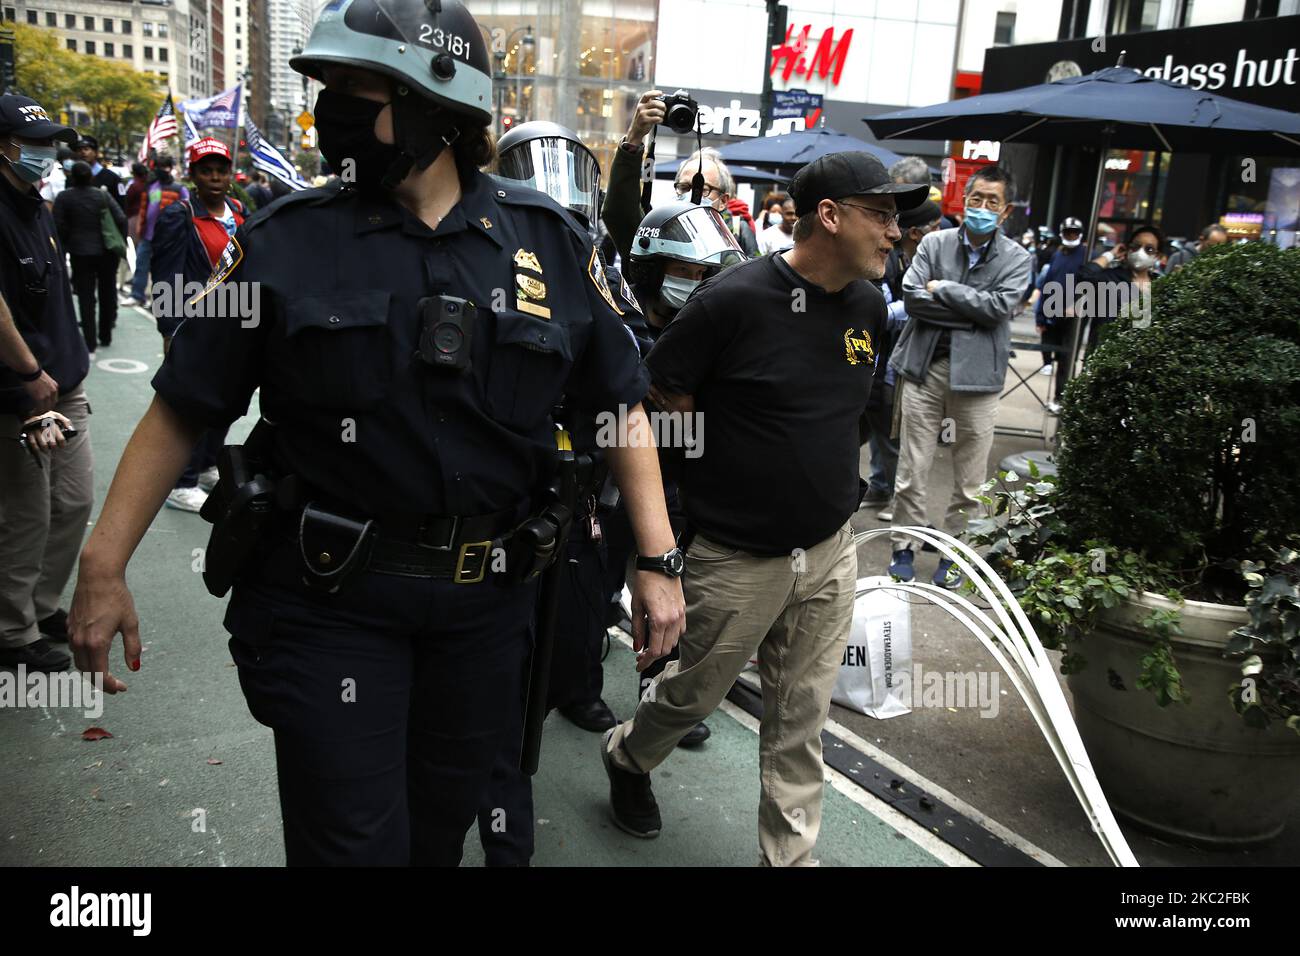 Supporters of President Trump clash with supporters of Joe Biden in Herald Square on October 24, 2020 in New York City. With the November 3rd Election Day fast approaching, tensions and verbal confrontations were heard from both party voters as they yelled slogans across 34th Street. (Photo by John Lamparski/NurPhoto) Stock Photo